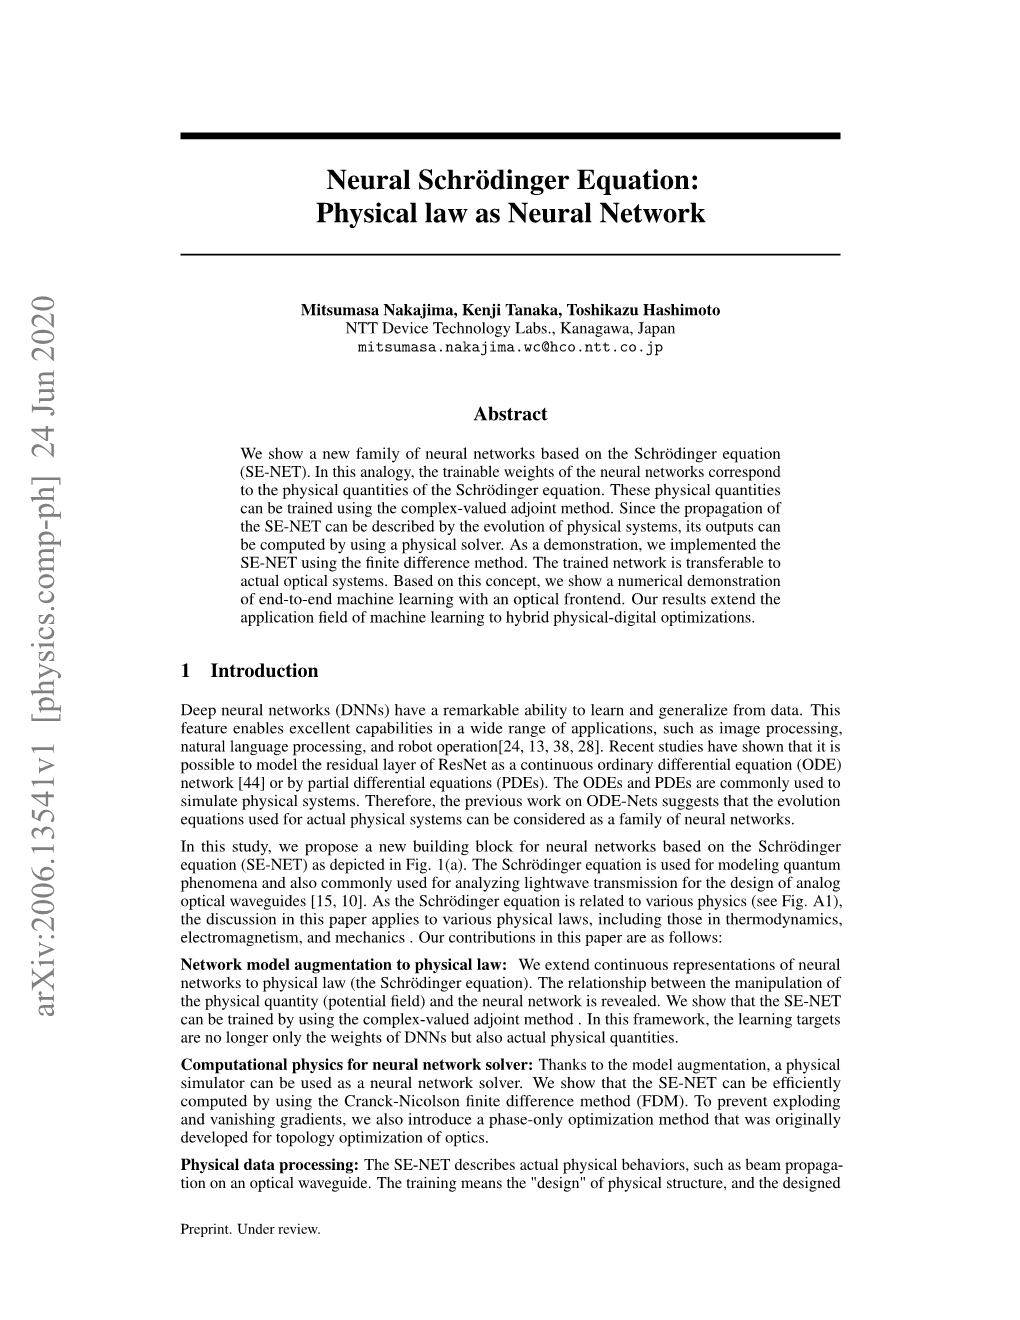 Neural Schr\"{O} Dinger Equation: Physical Law As Neural Network